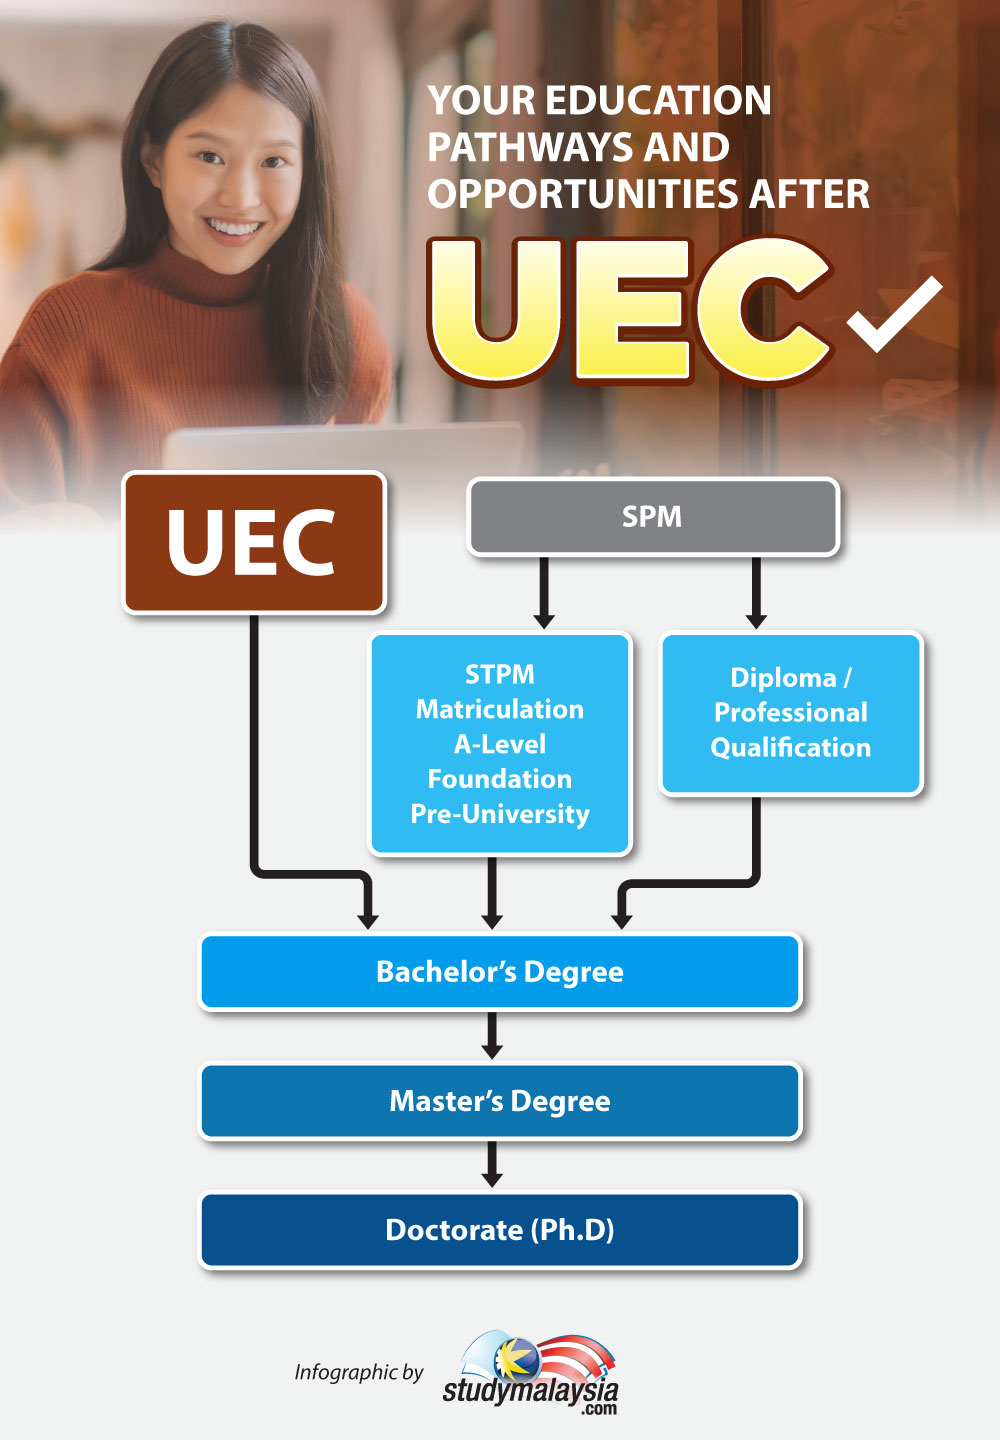 top-stories-2021-03-your-education-pathways-and-opportunities-after-uec-01.jpeg